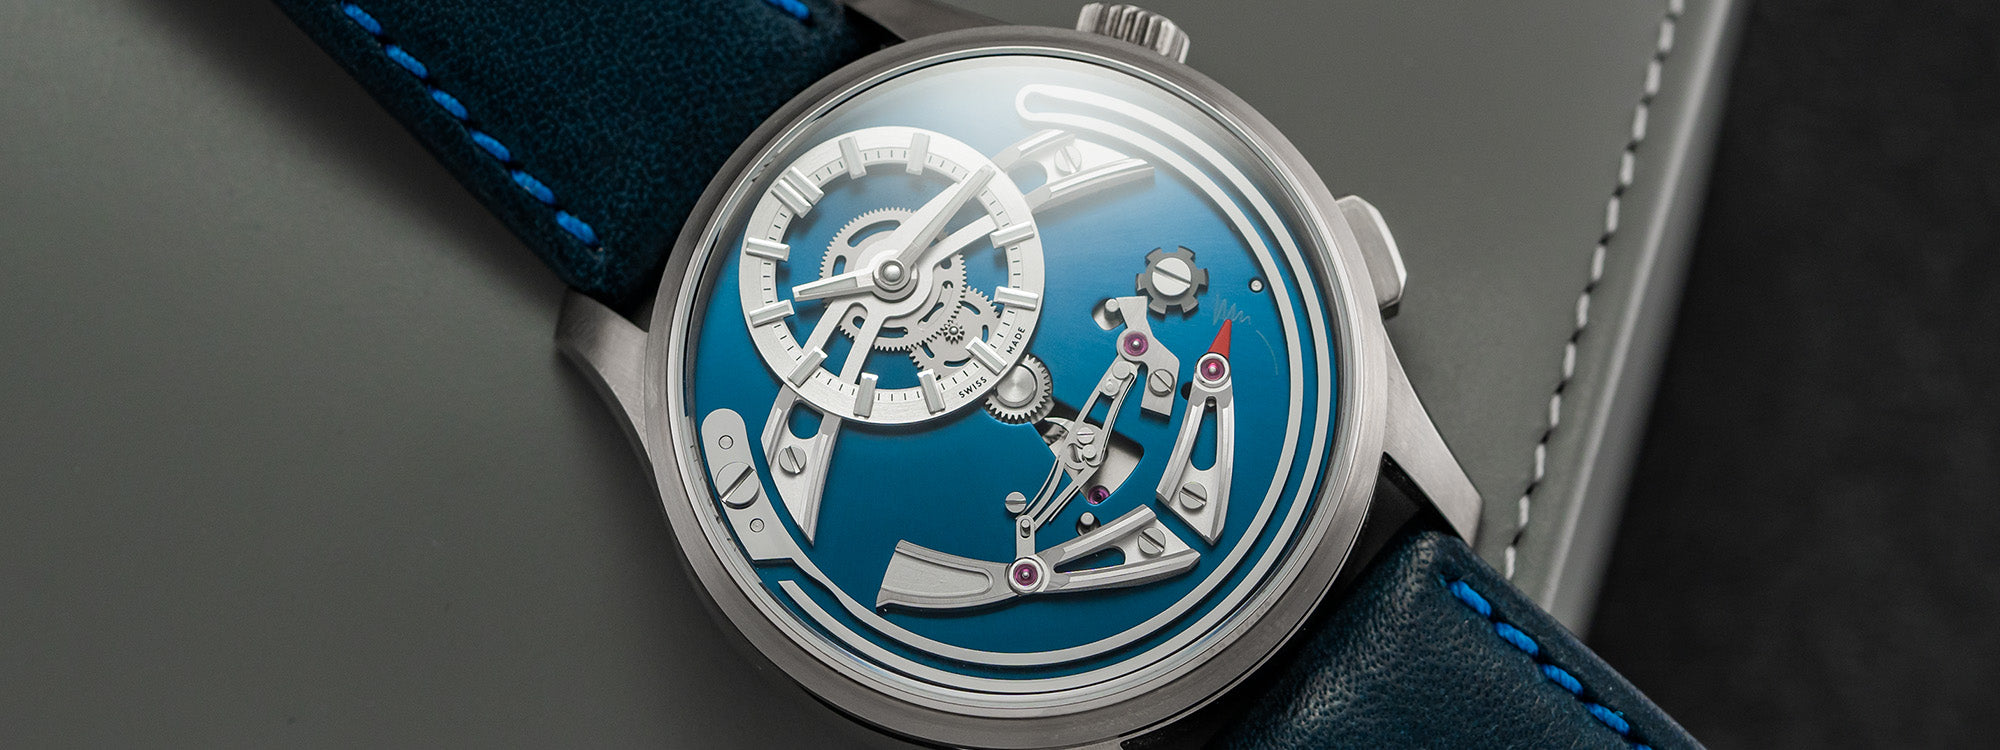 Chiming Watches: 12 Exceptional Minute Repeaters, Alarms, Sonneries, and Musical Timepieces